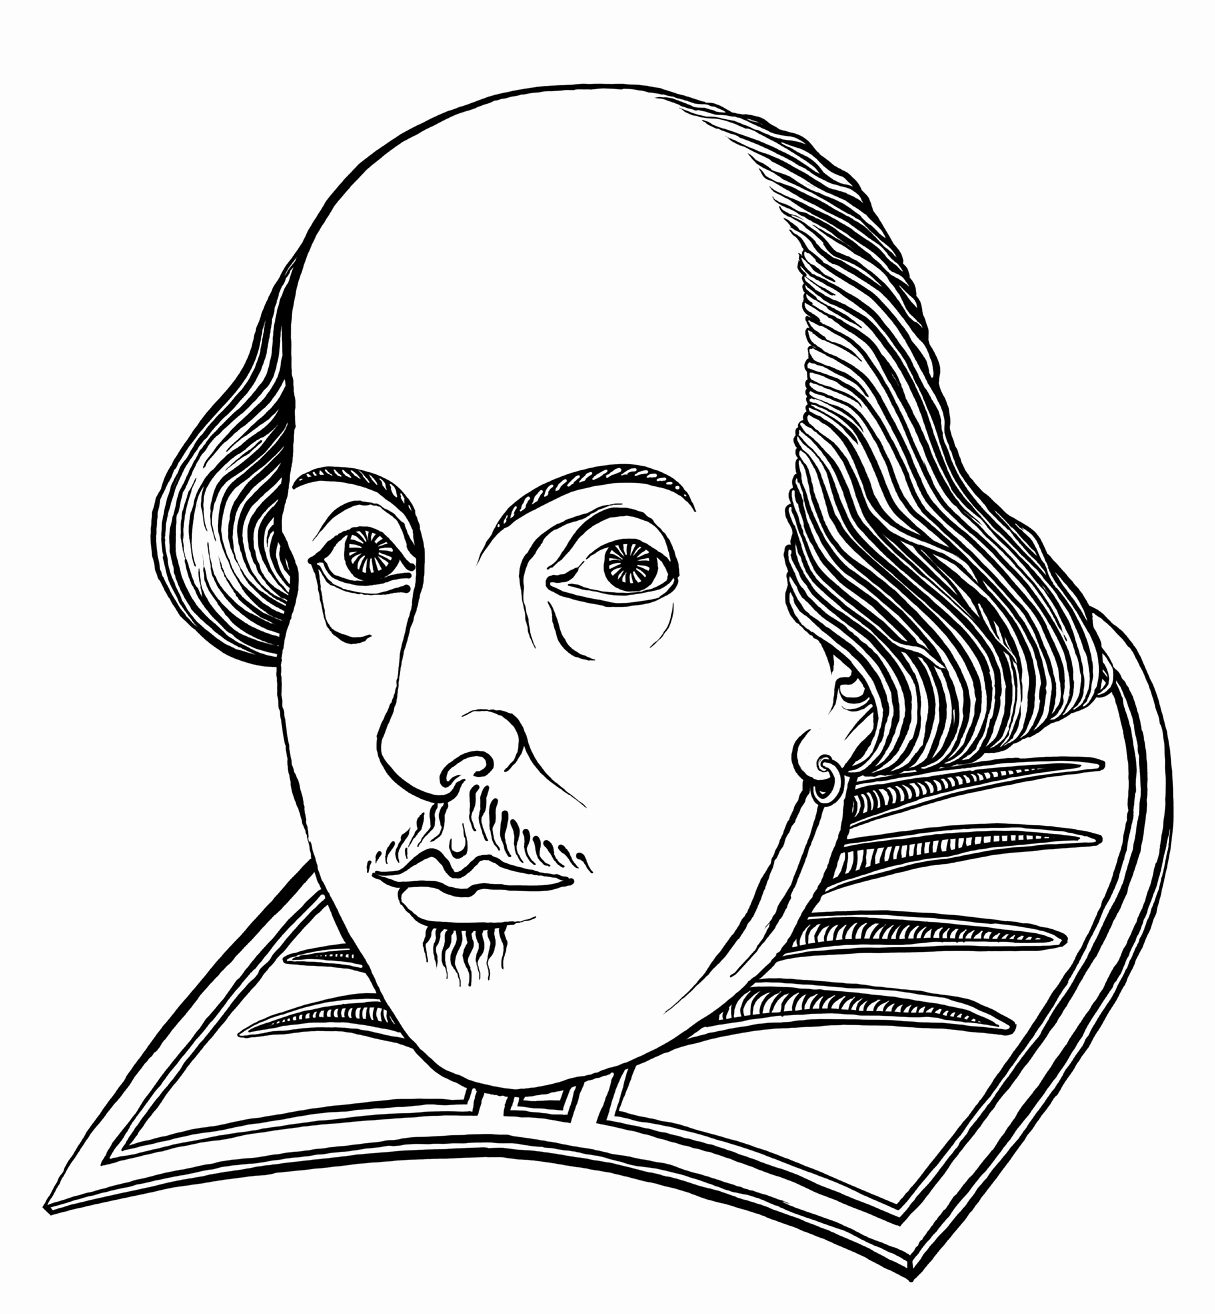 William Shakespeare Sketch at Explore collection